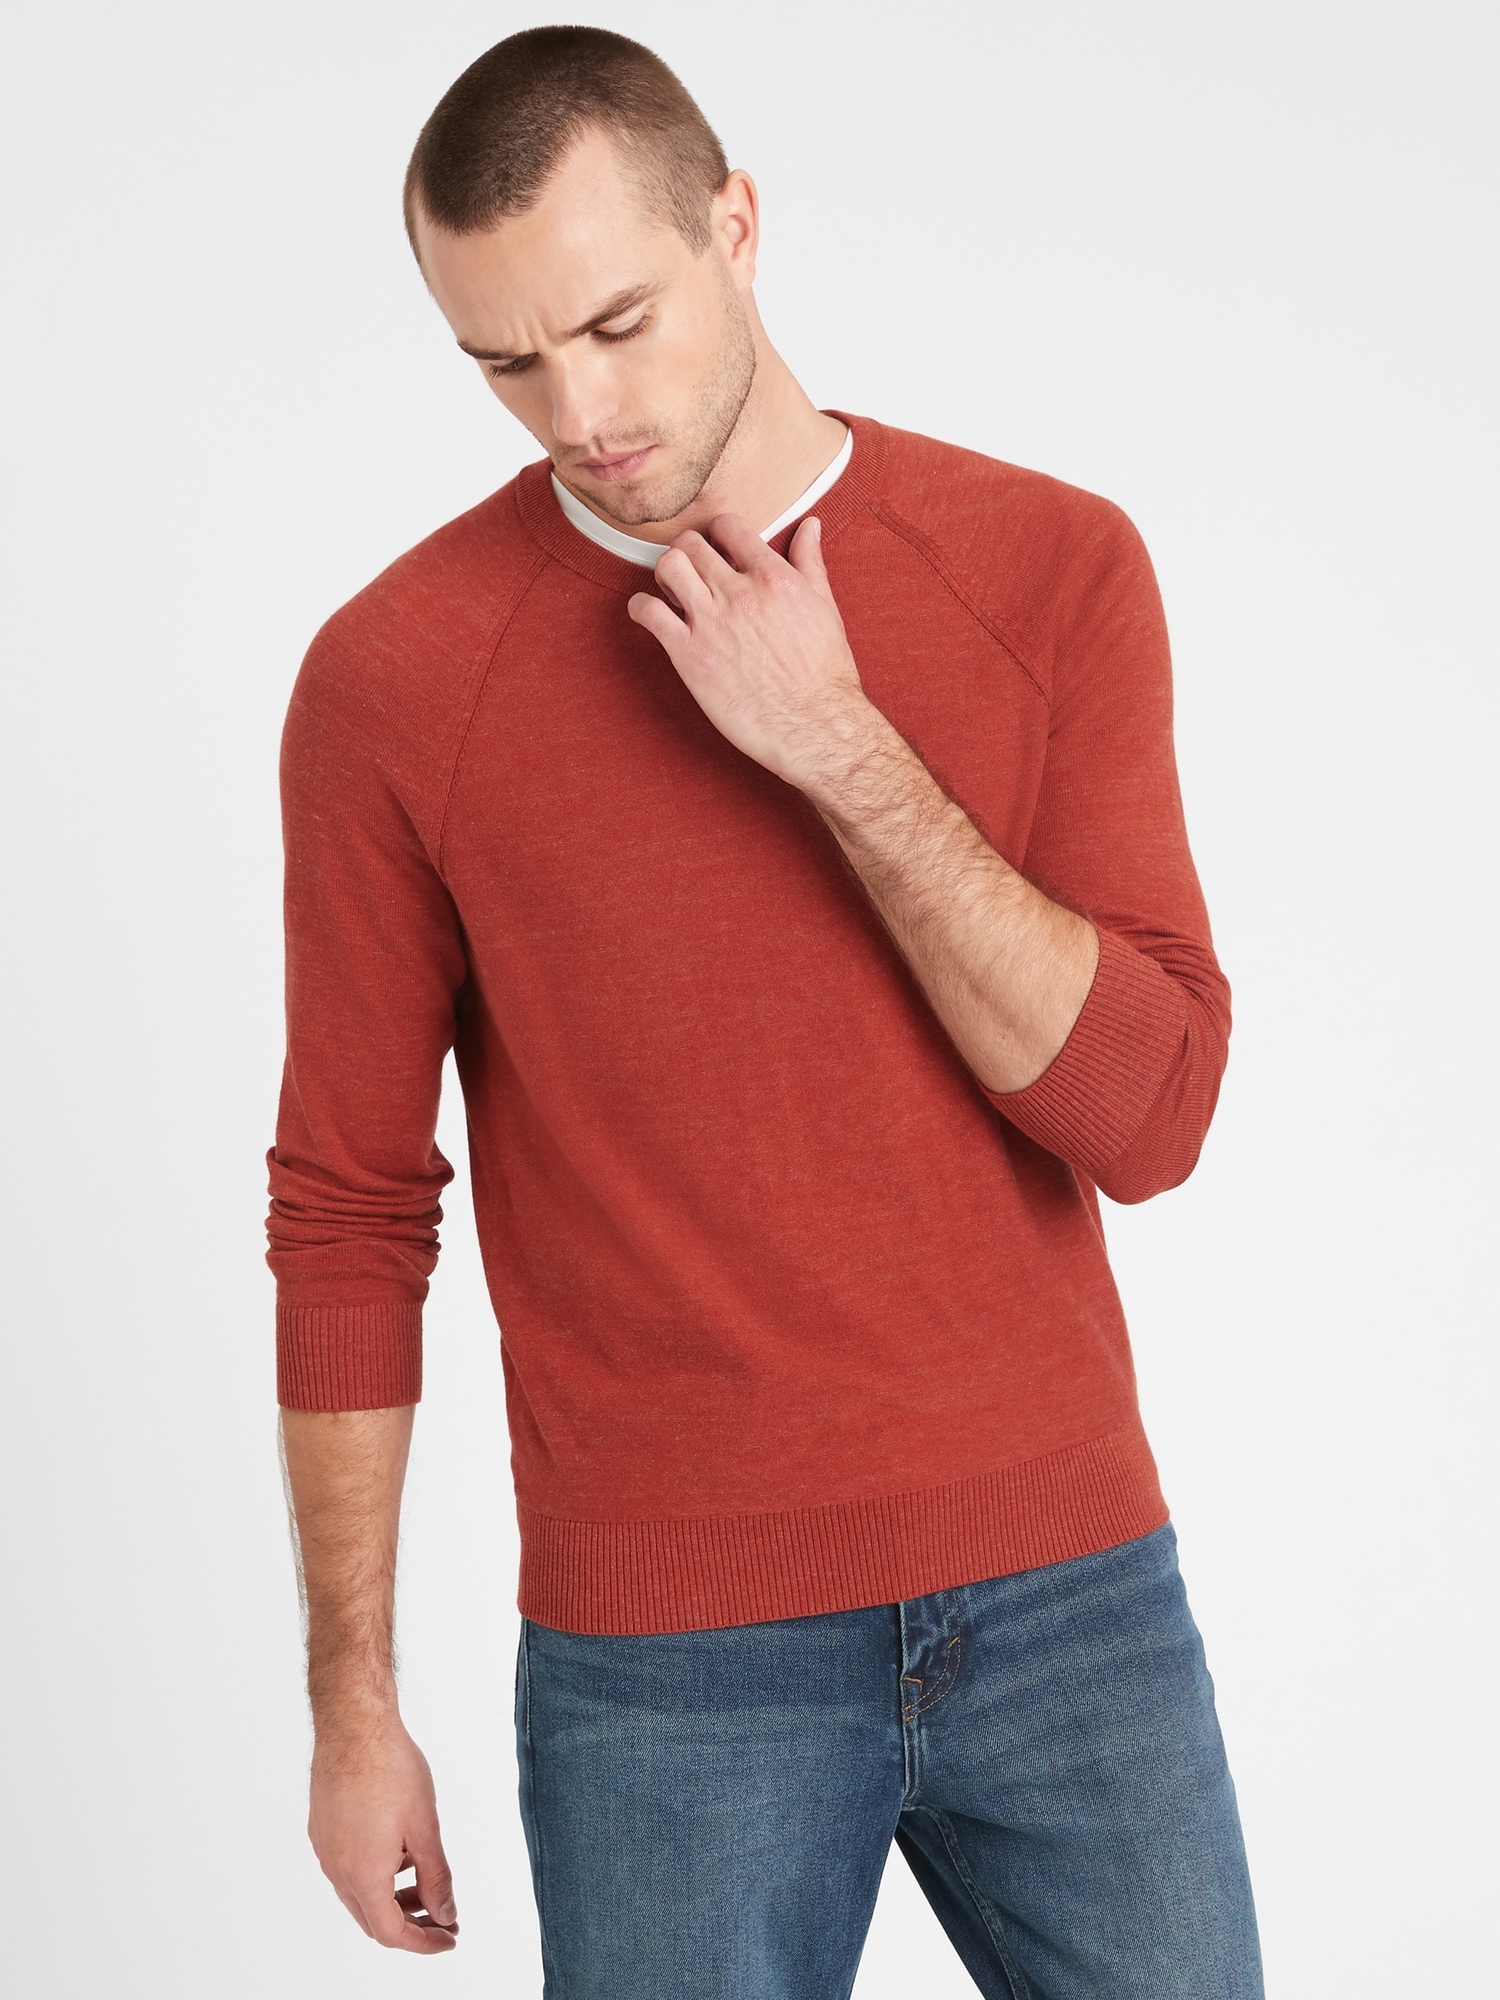 Men's Navy Certified Organic Cotton Sweater, with Red Bear embroidered on  Soft Sustainable Cotton